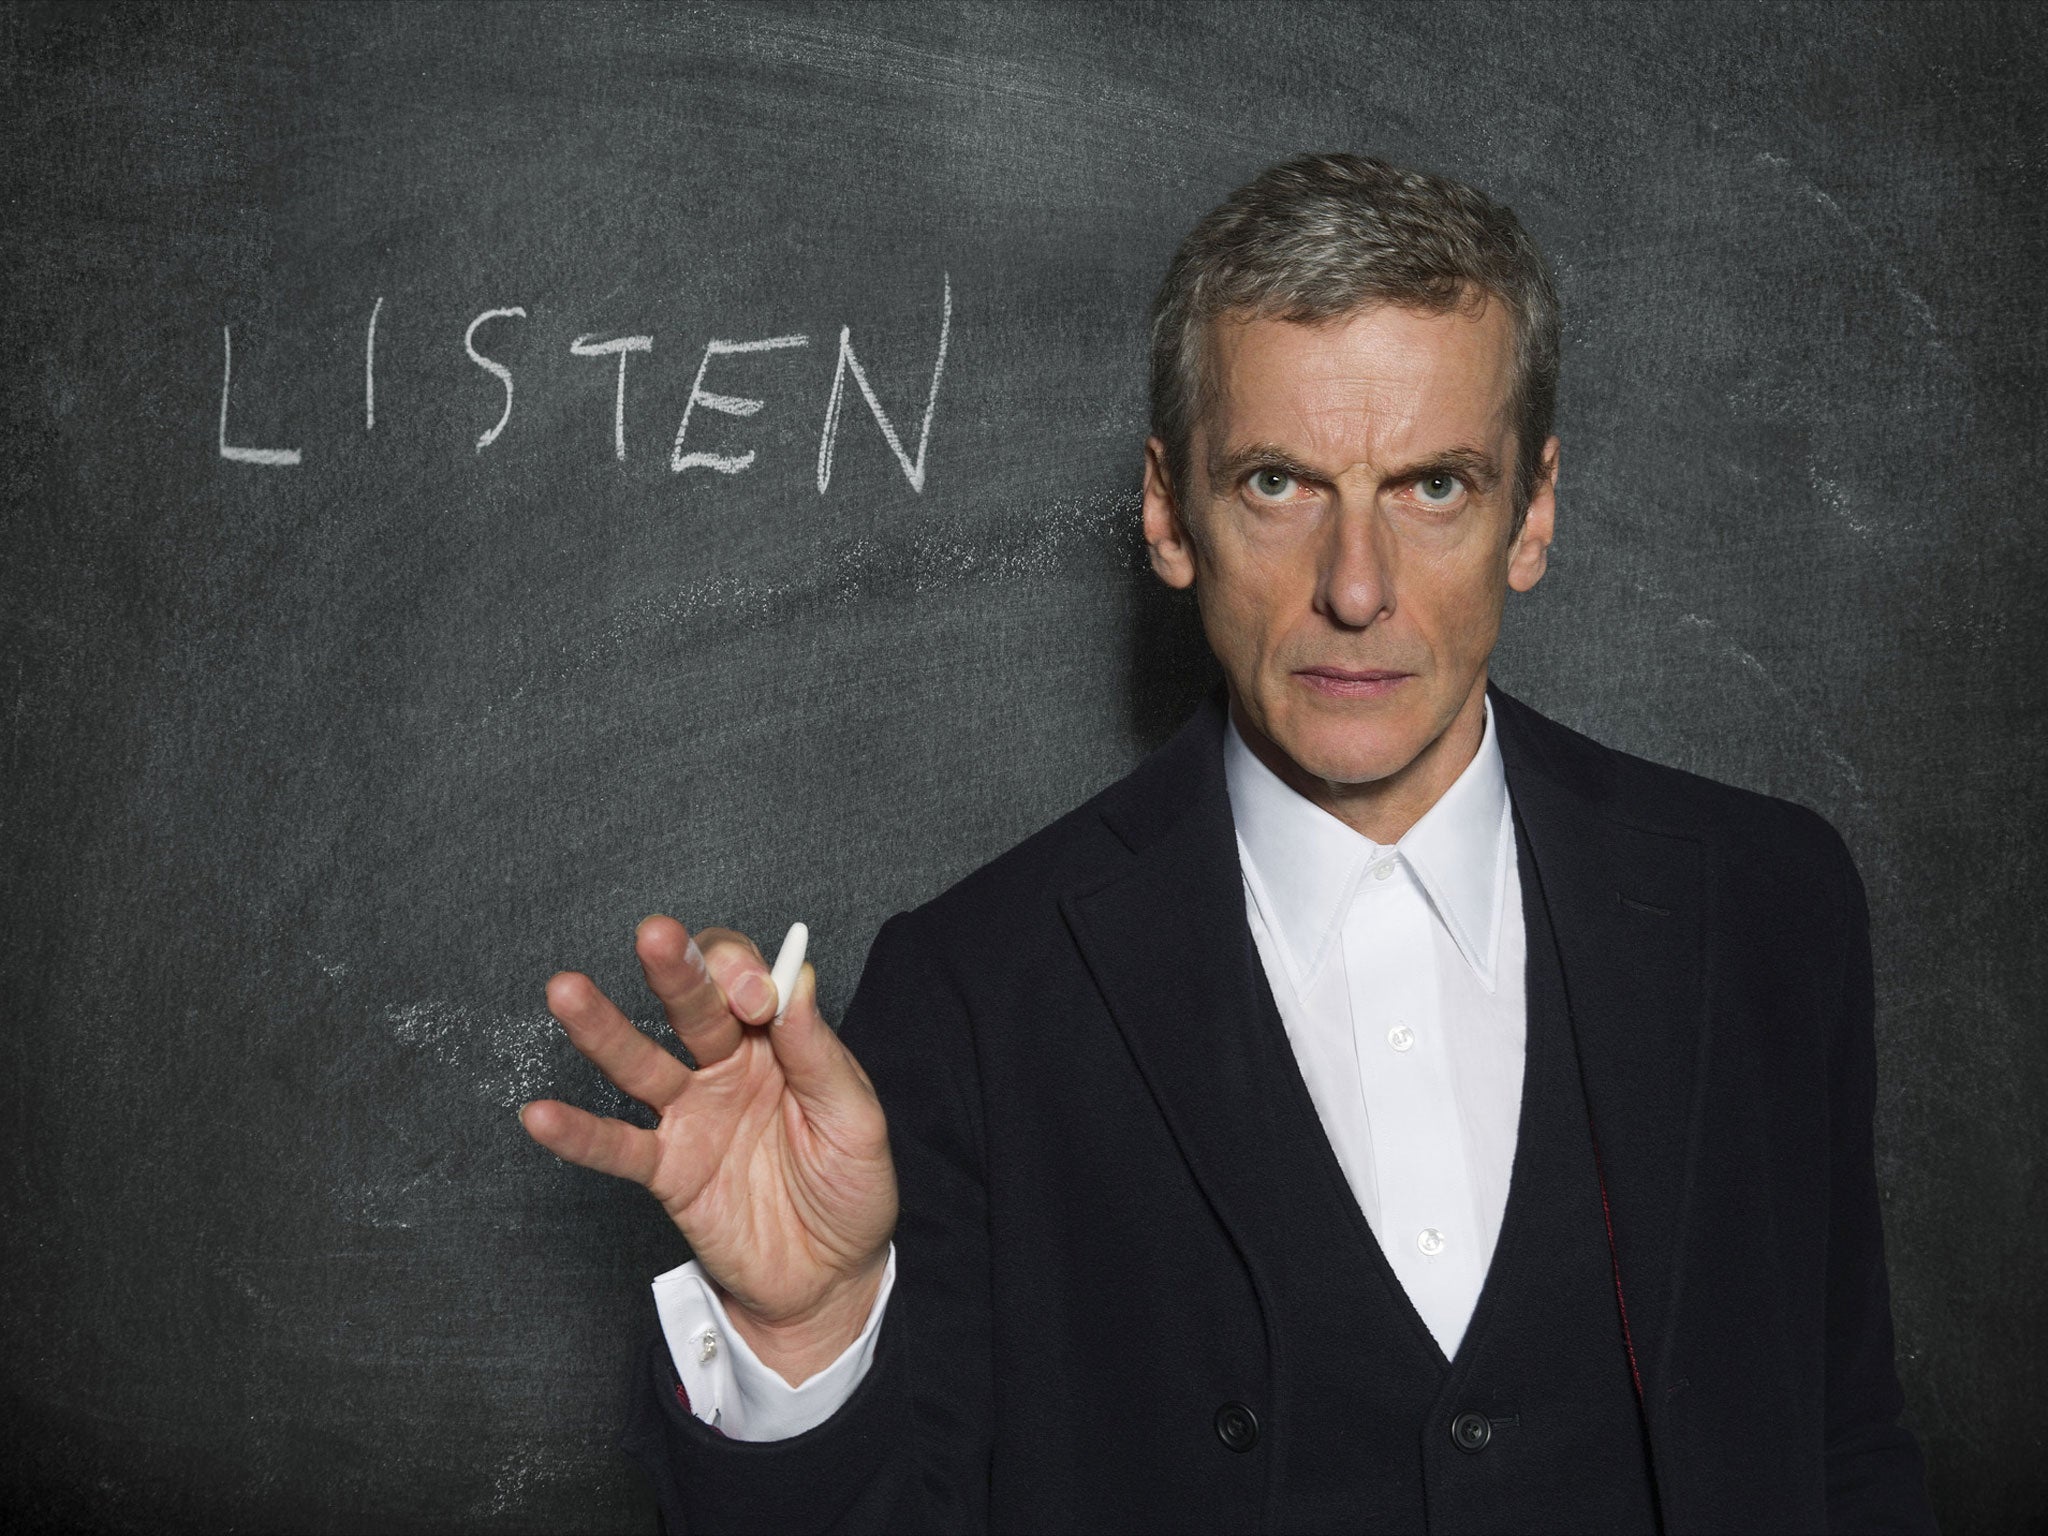 The Doctor poses the question of whether we are every truly alone in 'Listen'